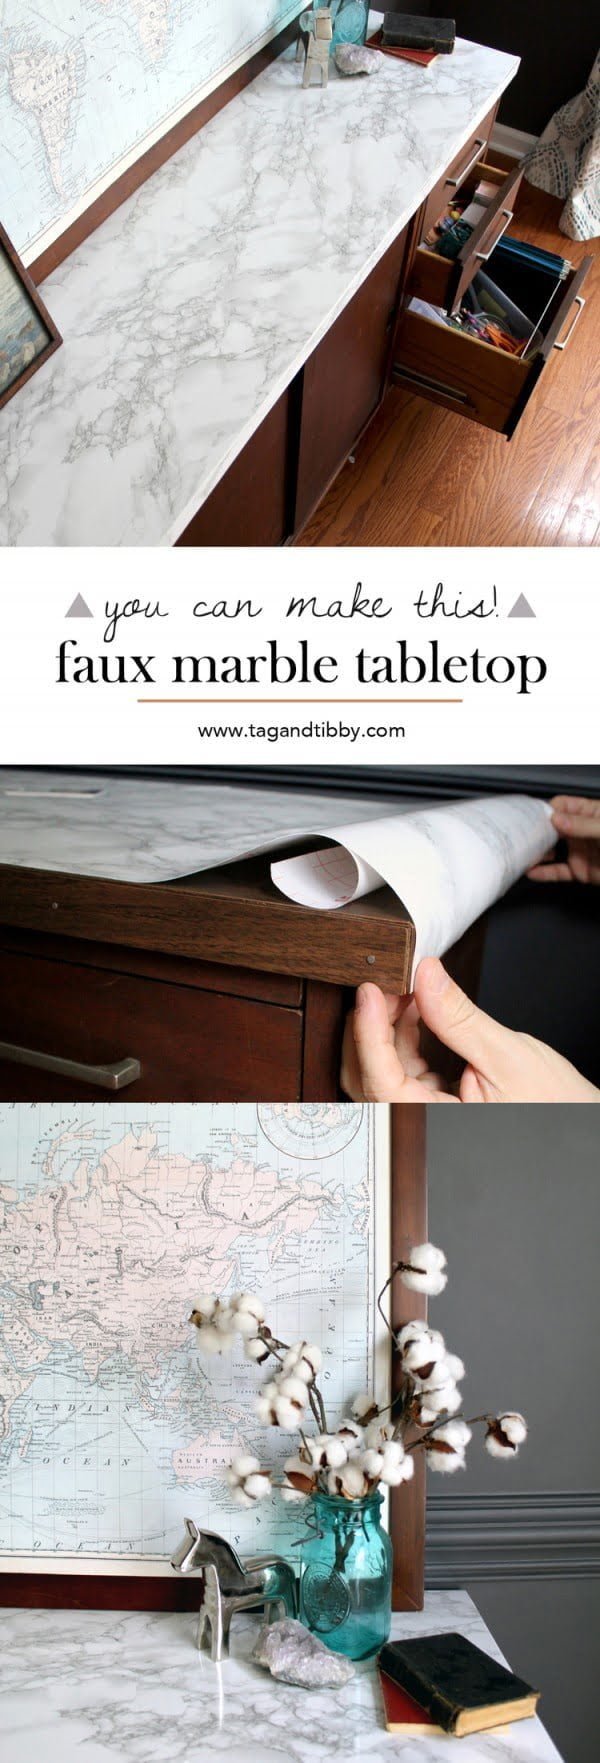 How to make an easy DIY faux marble tabletop 